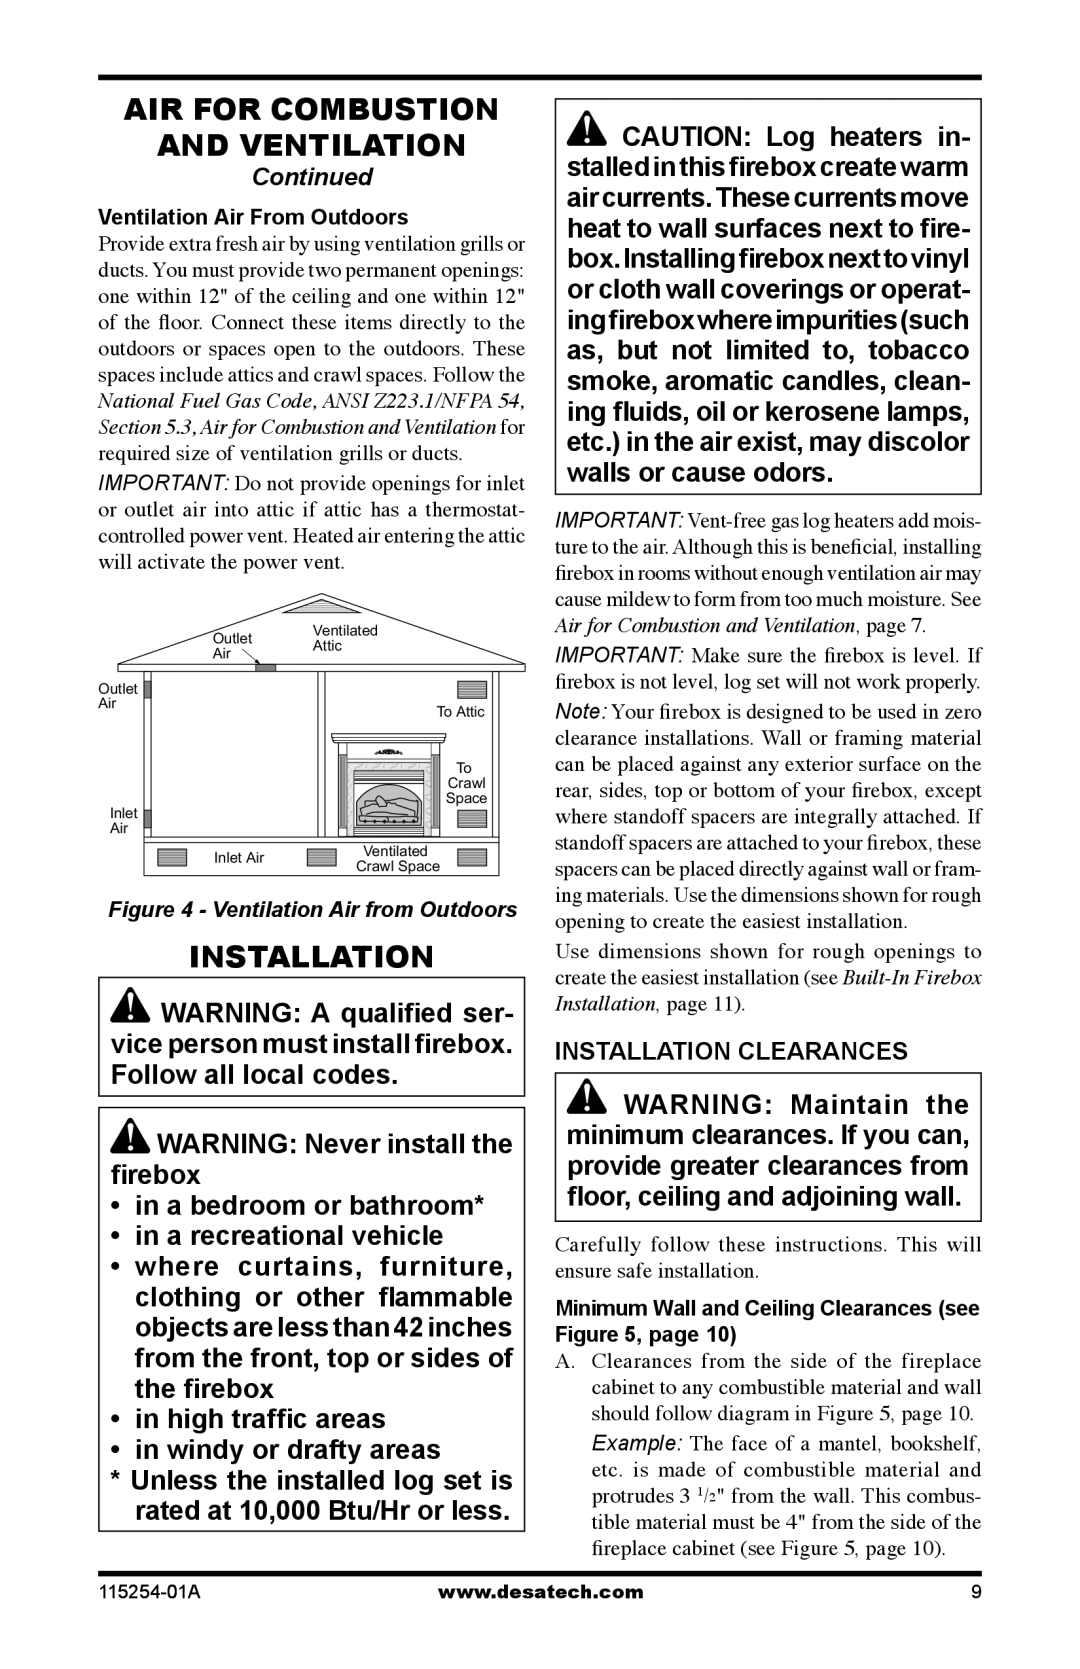 Desa LEN) (V)L32(HP, LZPR) Air For Combustion And Ventilation, Installation, WARNING Never install the ﬁrebox, Continued 